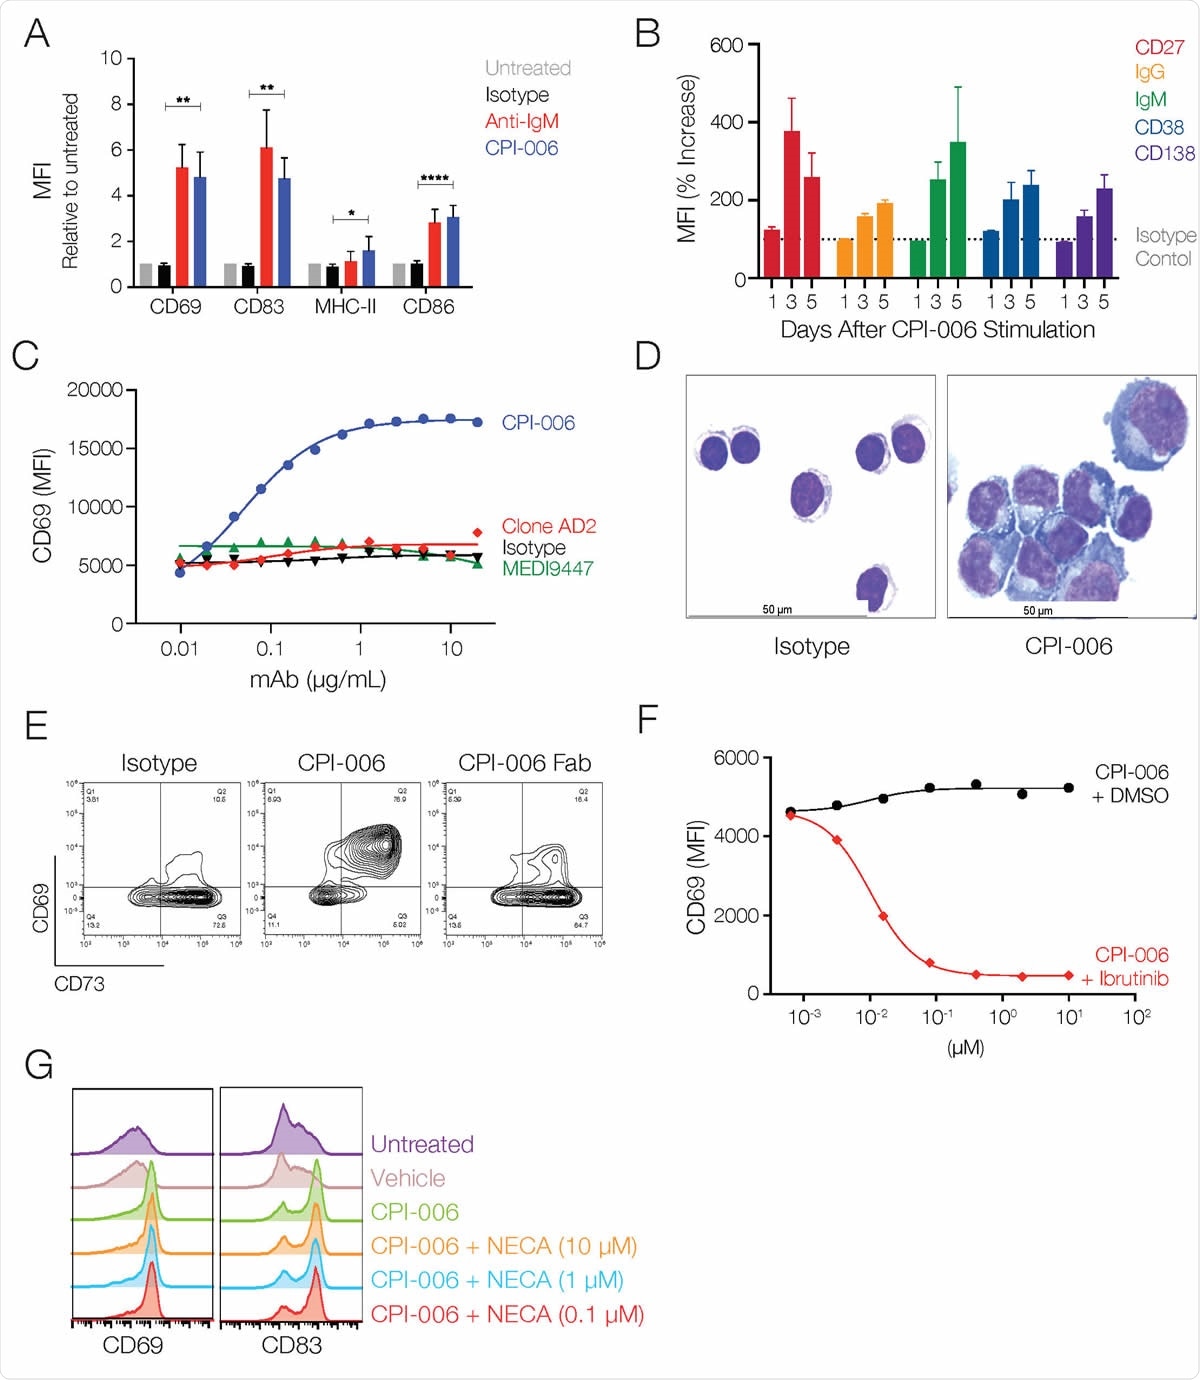 CPI-006 directly activates B lymphocytes and induces maturation into antibody secreting plasmablasts in vitro. (A) Purified B cells from 3-5 healthy donors were incubated overnight with human IgG1 isotype control or CPI-006 (10 μg/mL) or anti-IgM microbeads, a positive control for BCR stimulation. Expression of activation markers CD69, CD83, CD86, or MHC-II was measured by flow cytometry. B) Time dependent increases in the expression of CD27, IgG, IgM, CD38, and CD138 on purified B cells cultured in the presence of CPI-006 or isotype control (1 μg/mL). Mean fluorescence intensity (MFI) was determined for each marker and was normalized to the untreated or isotype control for each donor. C) B cell activation is unique to CPI-006 as other anti-CD73 antibodies do not induce CD69 expression. Expression of CD69 (MFI) was measured by flow cytometry. D) Representative images of purified B cells cultured with isotype control (left panel) or CPI-006 for 2 days. E) Purified B cells were incubated overnight with 10 μg/mL human IgG1 isotype control or CPI-006 or equimolar CPI-006 Fab. CD69 and CD73 were measured on B cells by flow cytometry. (F) Human PBMCs were incubated overnight with a fixed concentration of CPI-006 (10 μg/mL) along with ibrutinib or vehicle control over a range of concentrations. Expression of CD69 on B cells (CD19POSCD3NEG) was measured by flow cytometry. G) Human PBMCs were incubated overnight with 10 μg/mL CPI-006 with or without NECA over a range of concentrations or 10 μM APCP. Expression of CD69 on B cells (CD19+CD3-) was measured by flow cytometry and MFI is reported. Error bars represent mean ± SD. *p<0.05, **p<0.01 as determined by t-test.